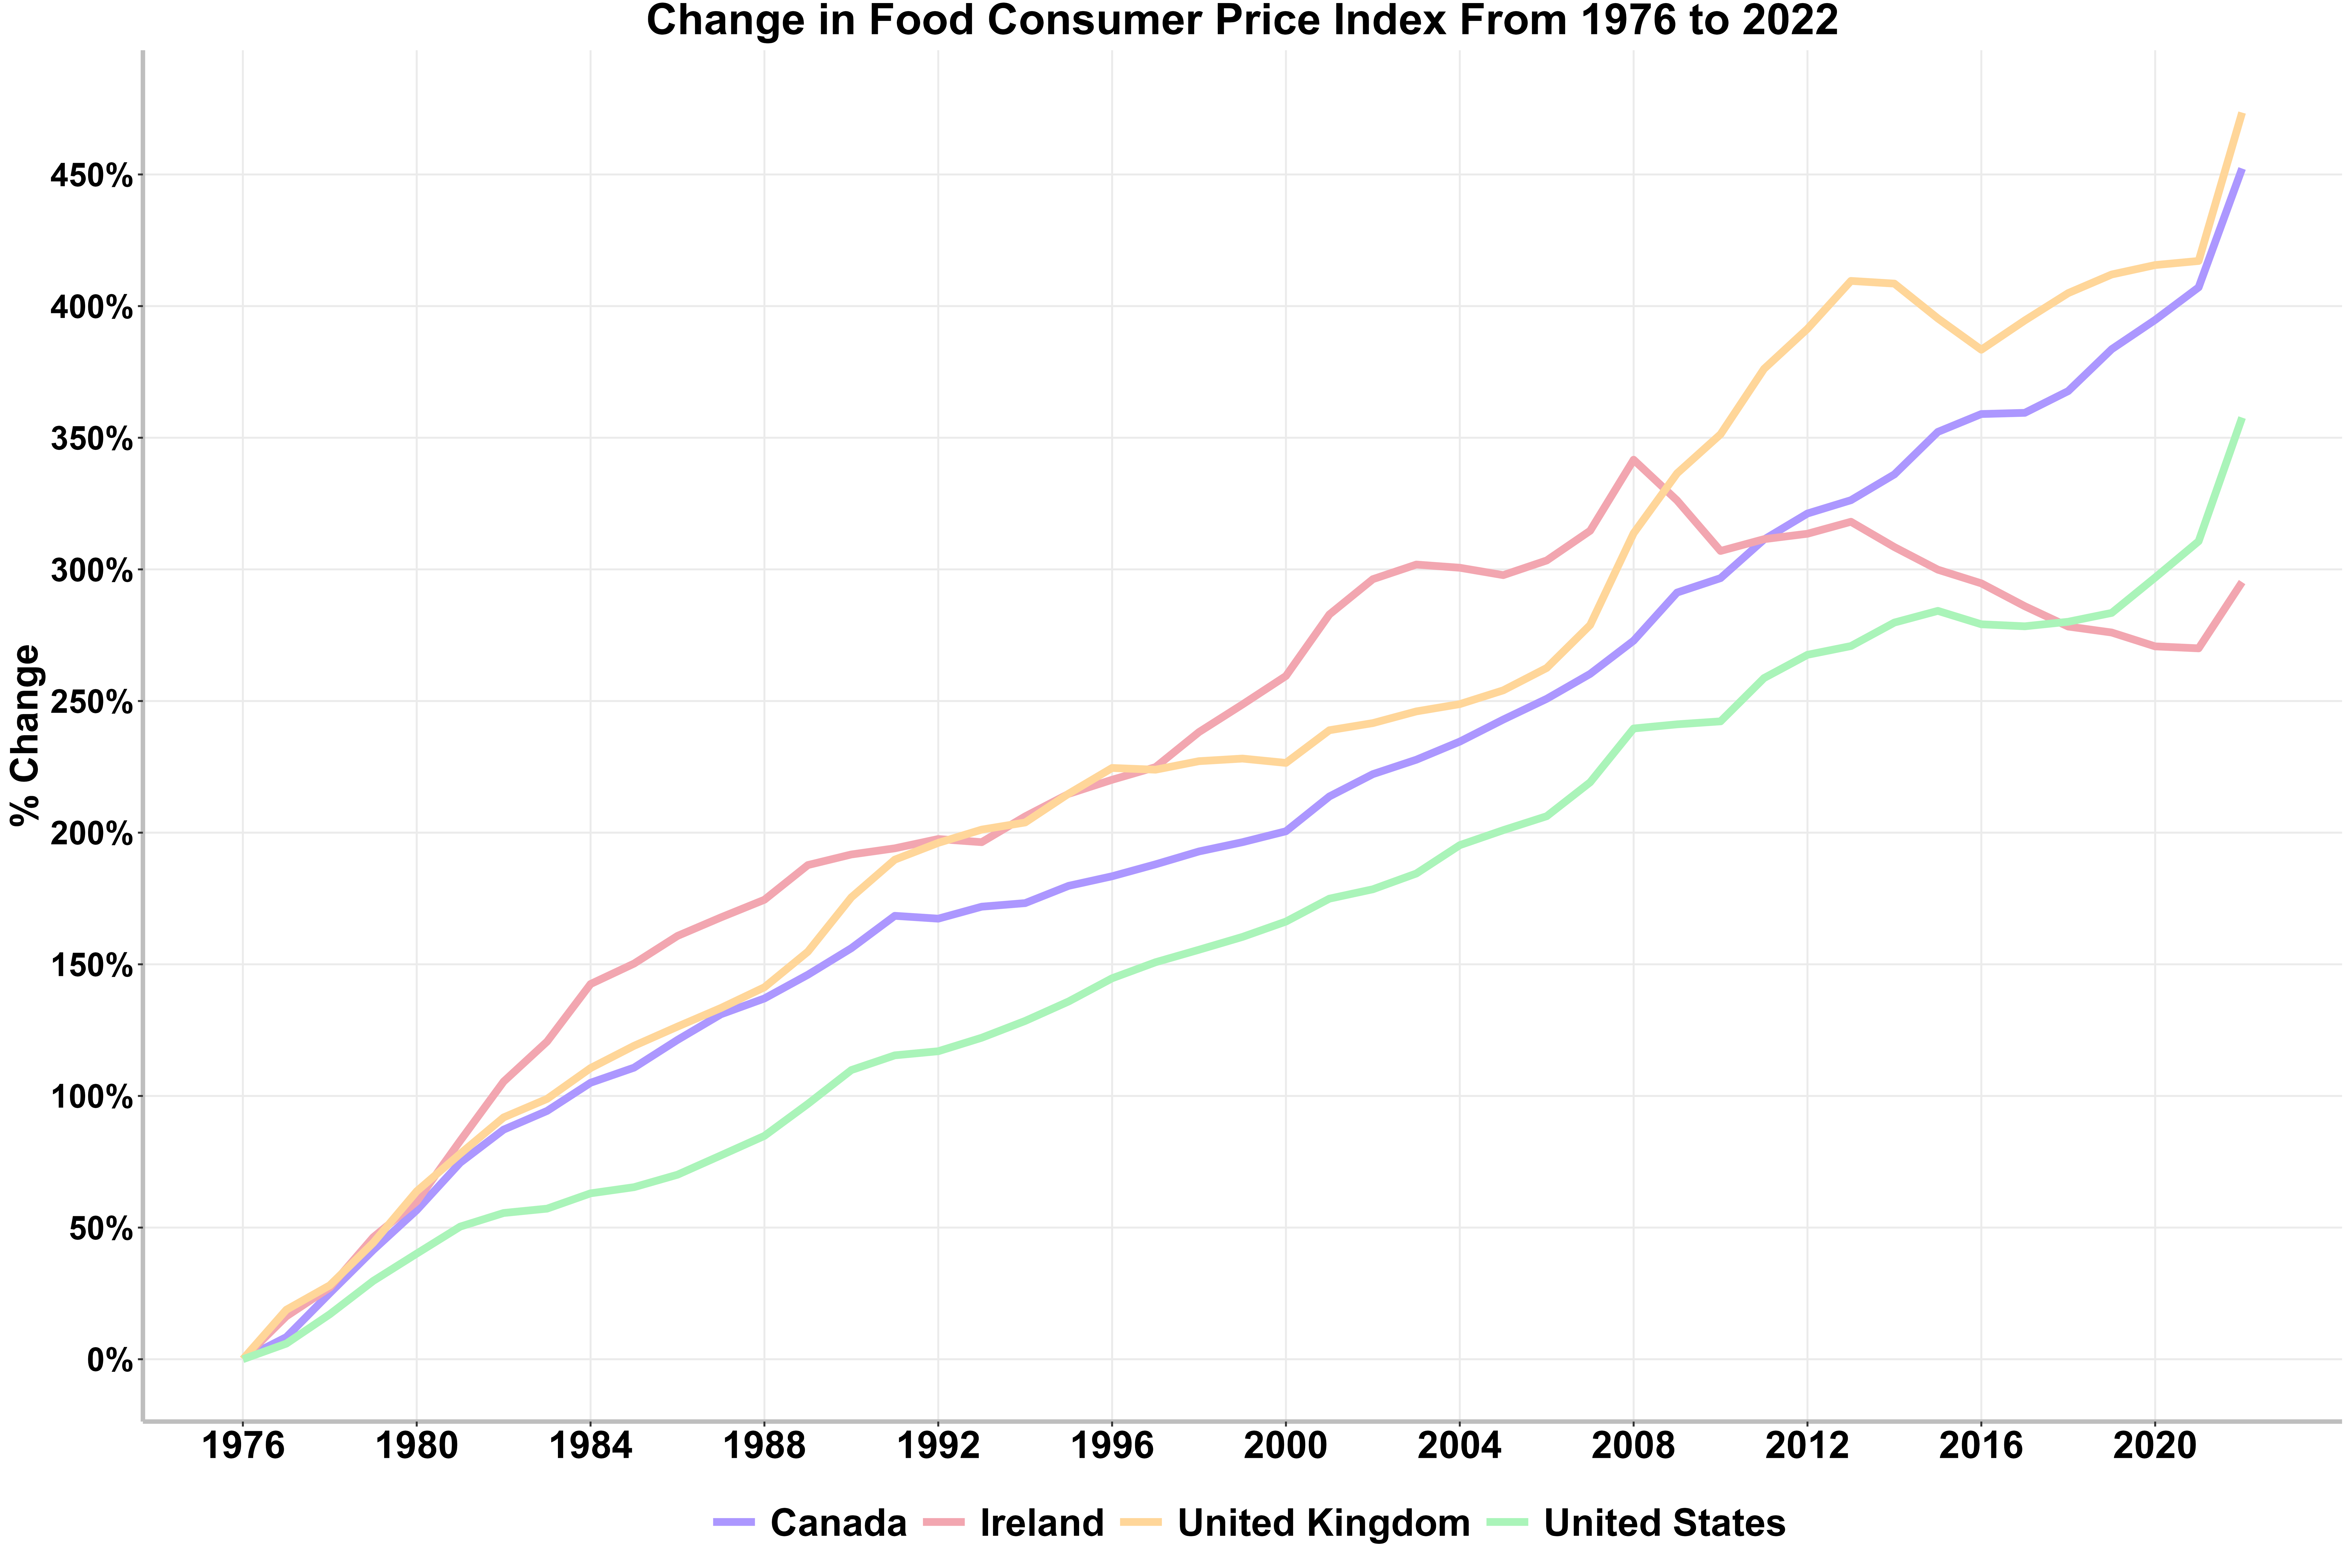 Overall change in Food CPI since 1976